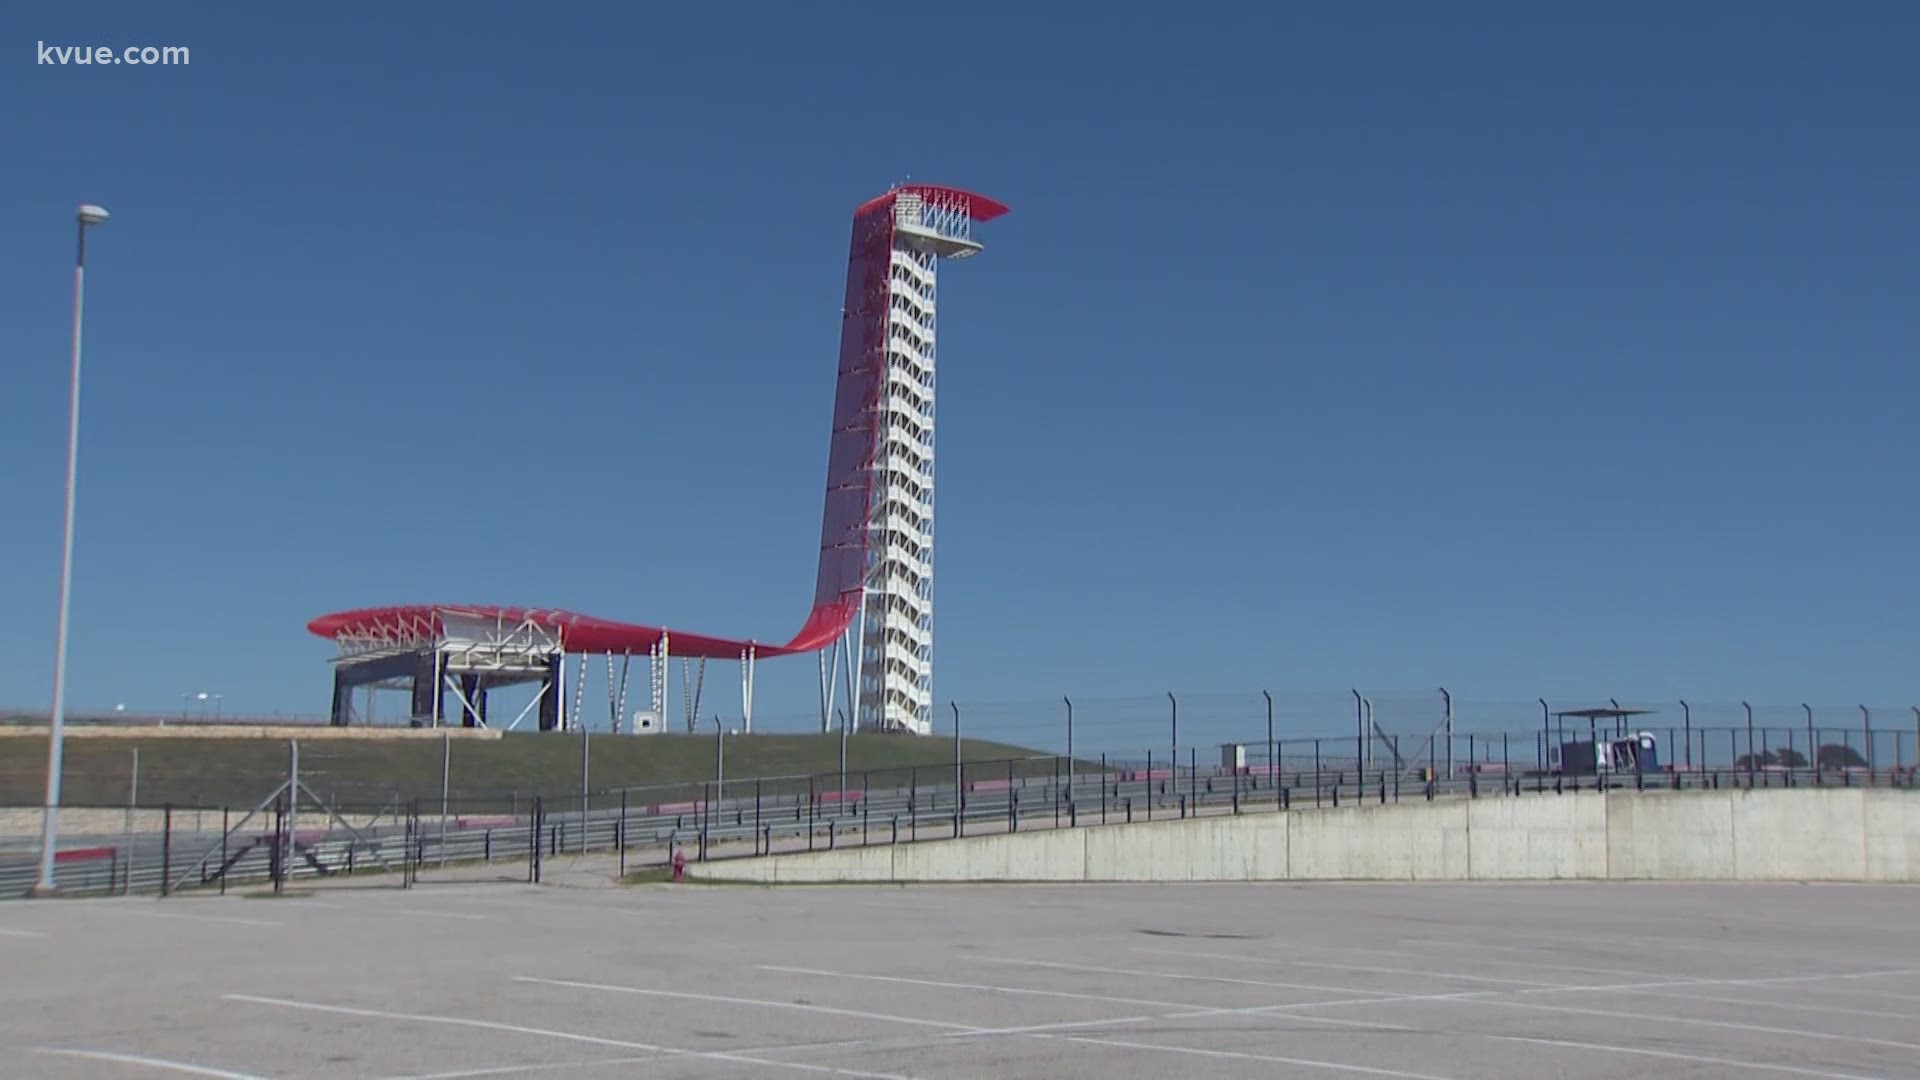 NASCAR's Cup Series is set to speed into Austin next spring – and it could be just the thing the city needs to recover from COVID-19 financial struggles.